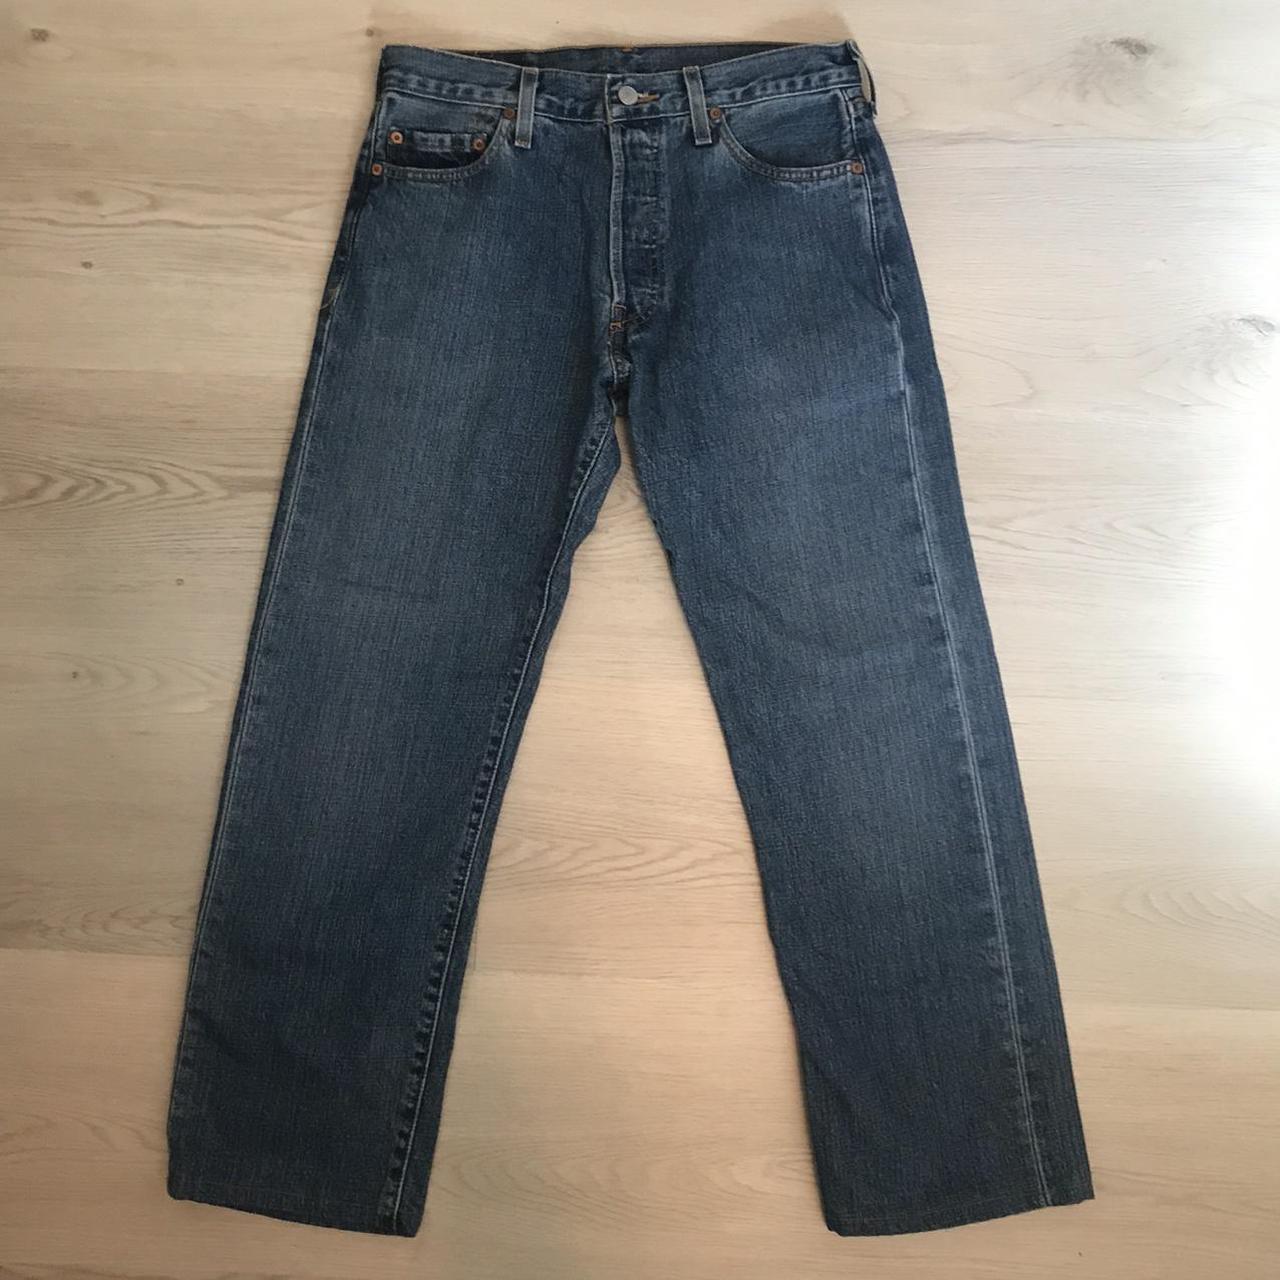 Levi's Women's Navy and Blue Jeans (2)